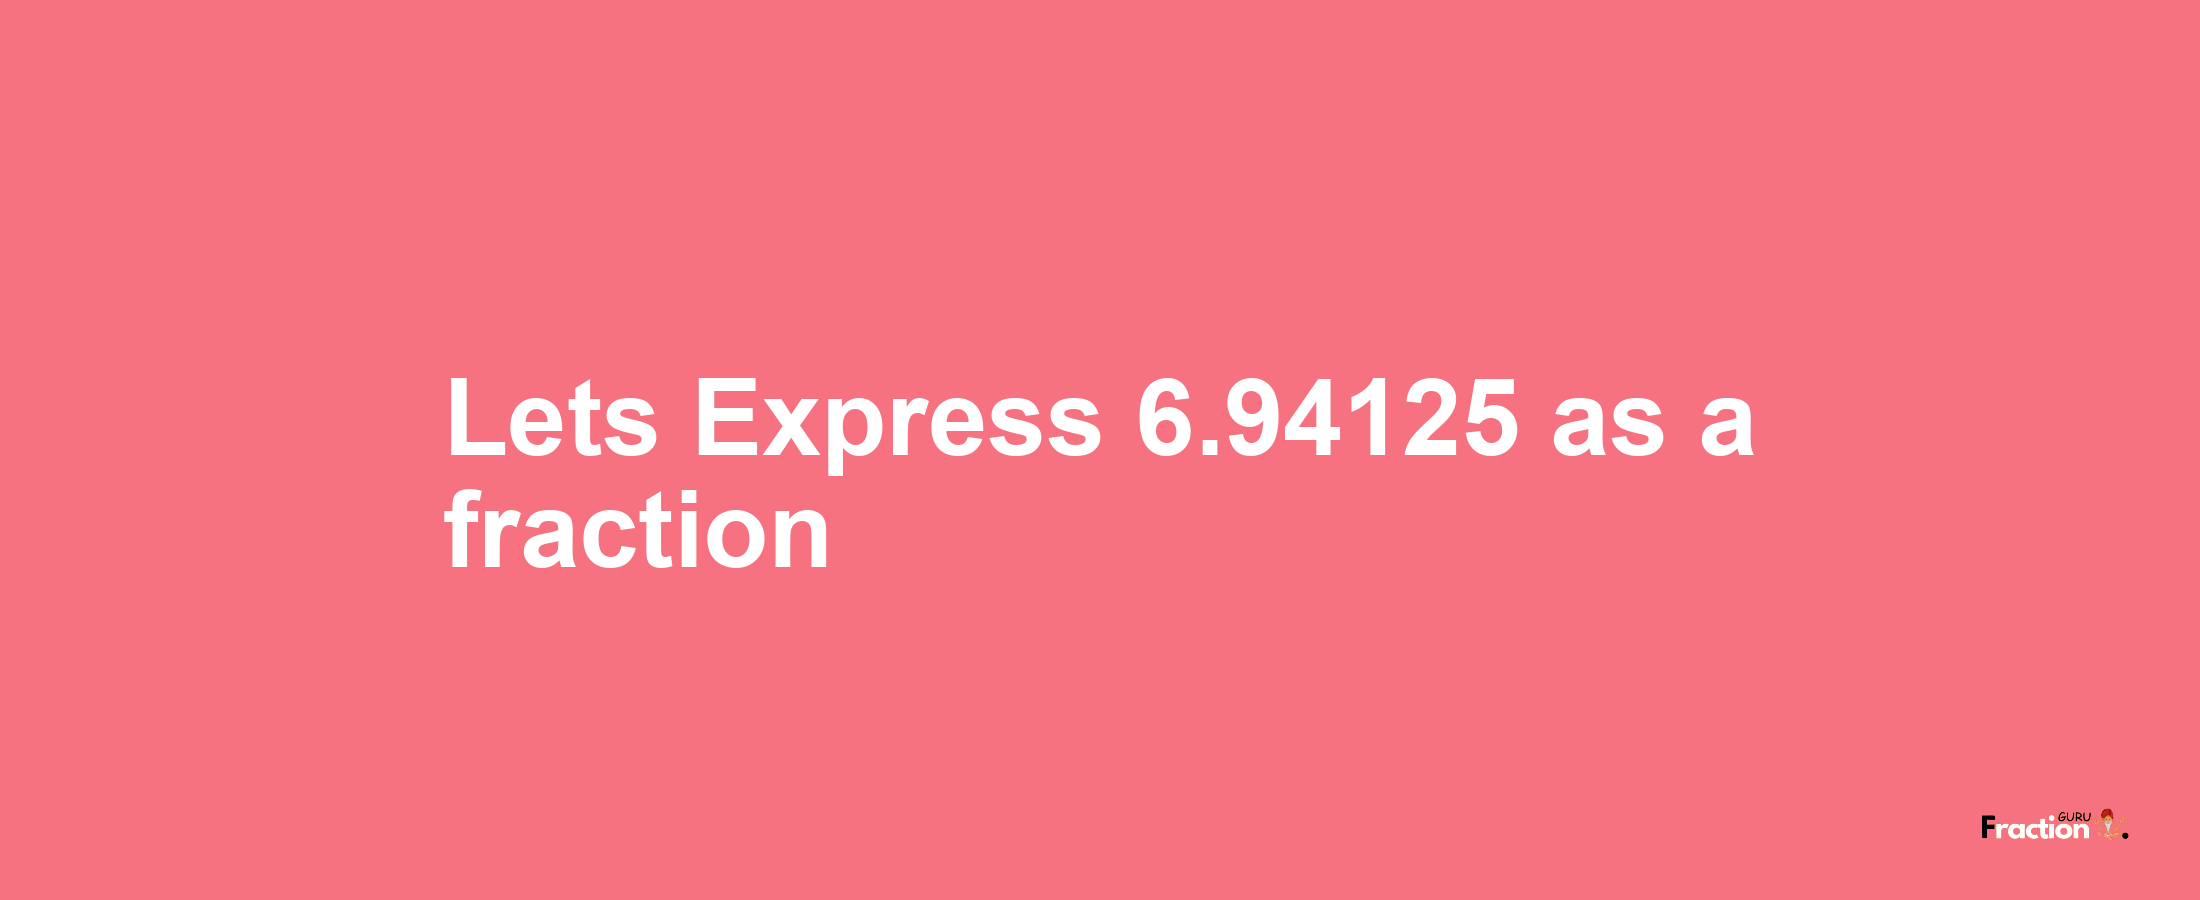 Lets Express 6.94125 as afraction